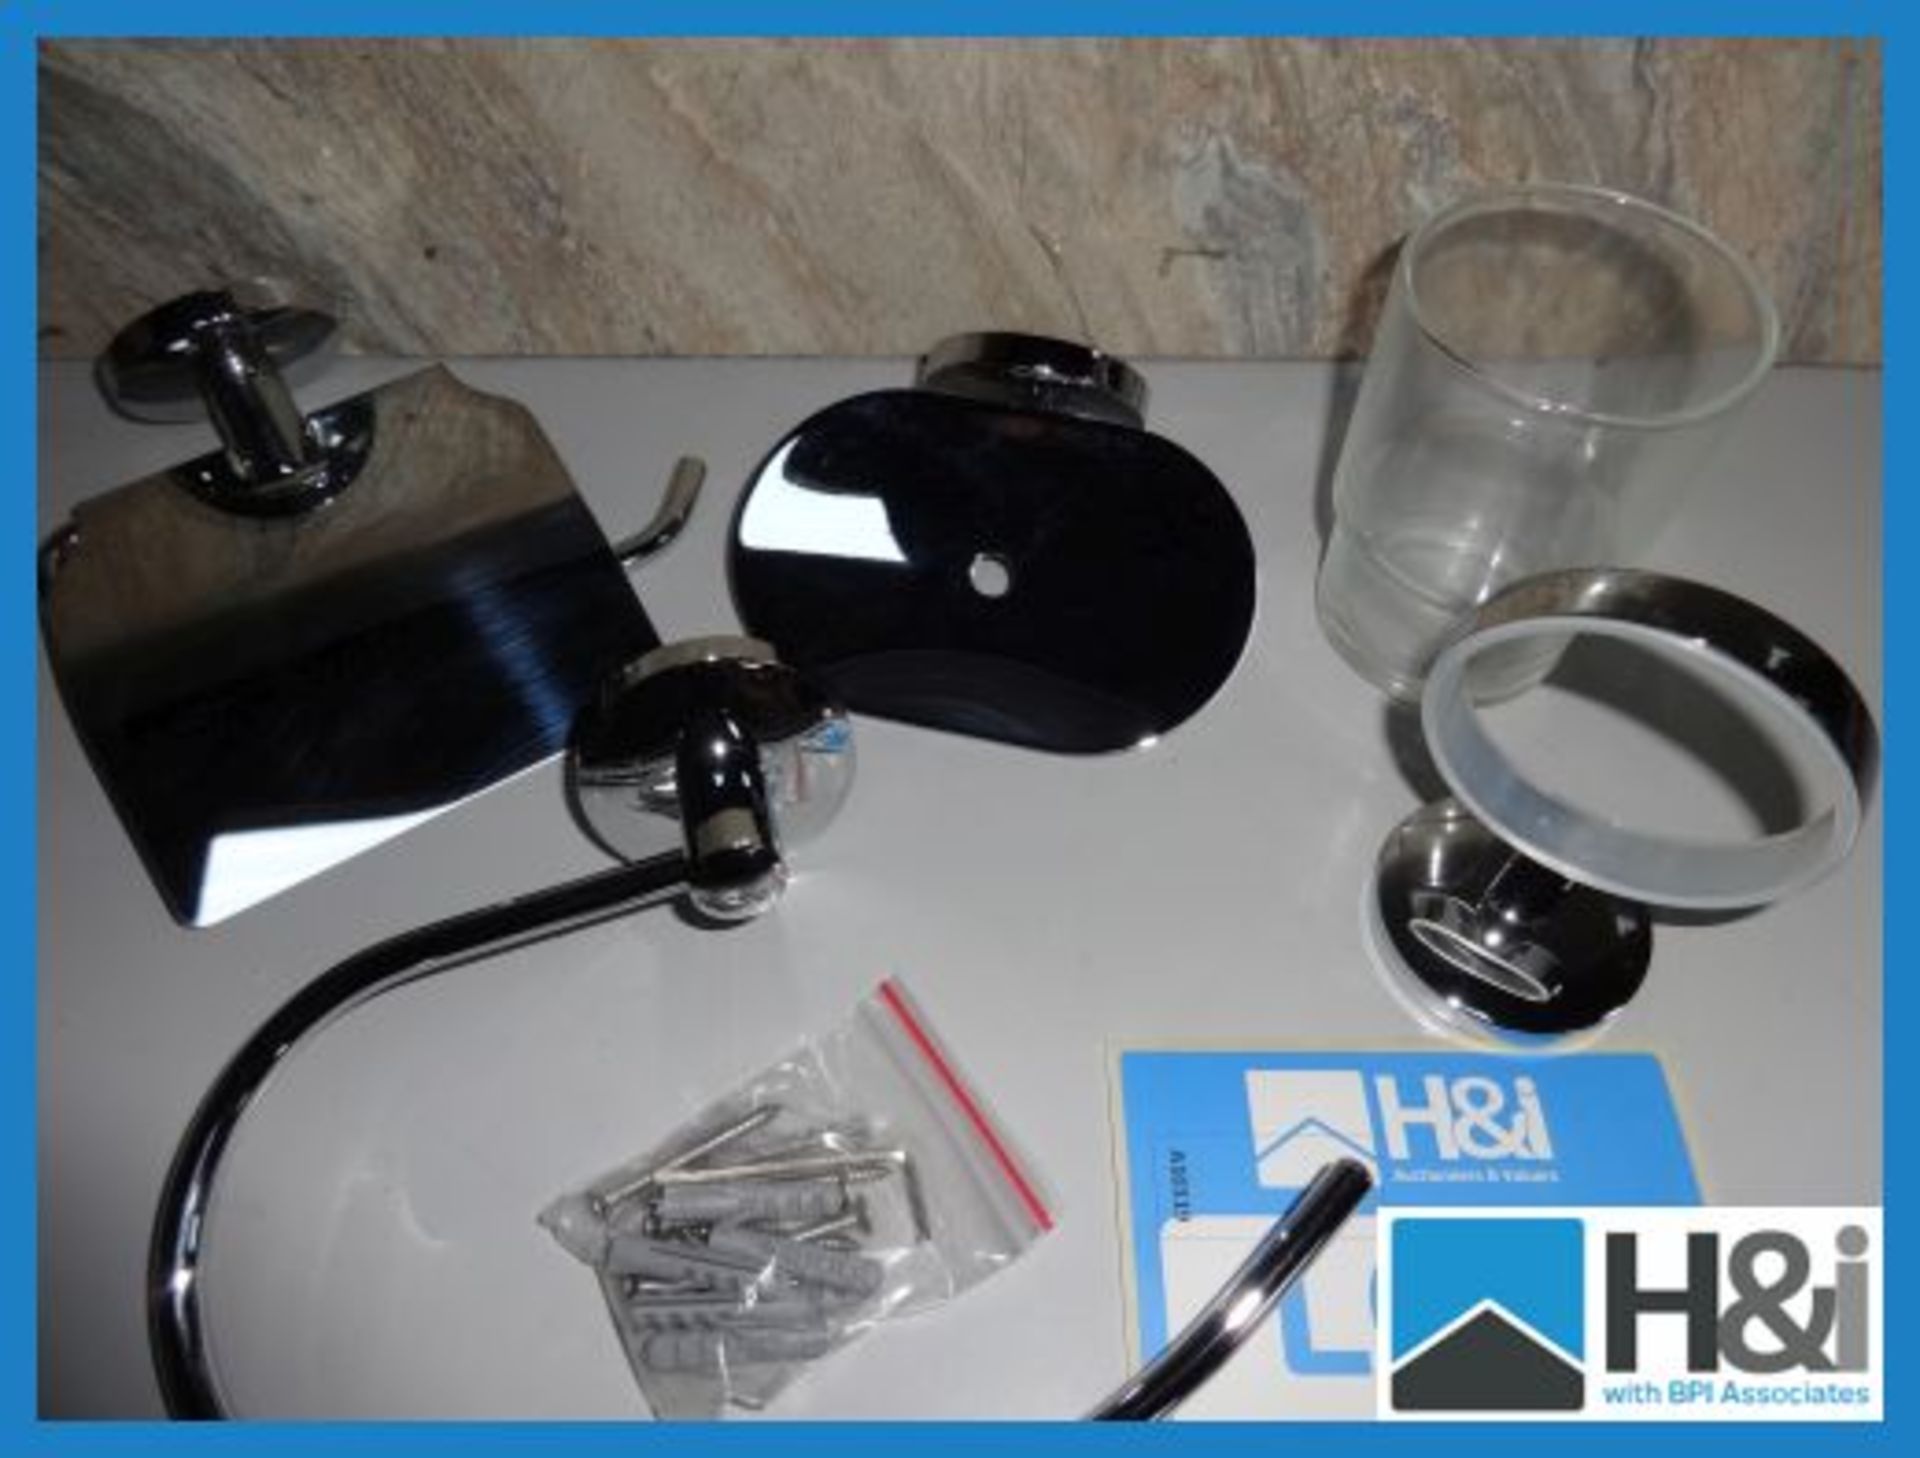 Bathroom Accessory Set comprising Soap Dish, Tumbler and Holder, Towel Ring and Toilet Tissue Holder - Image 2 of 2